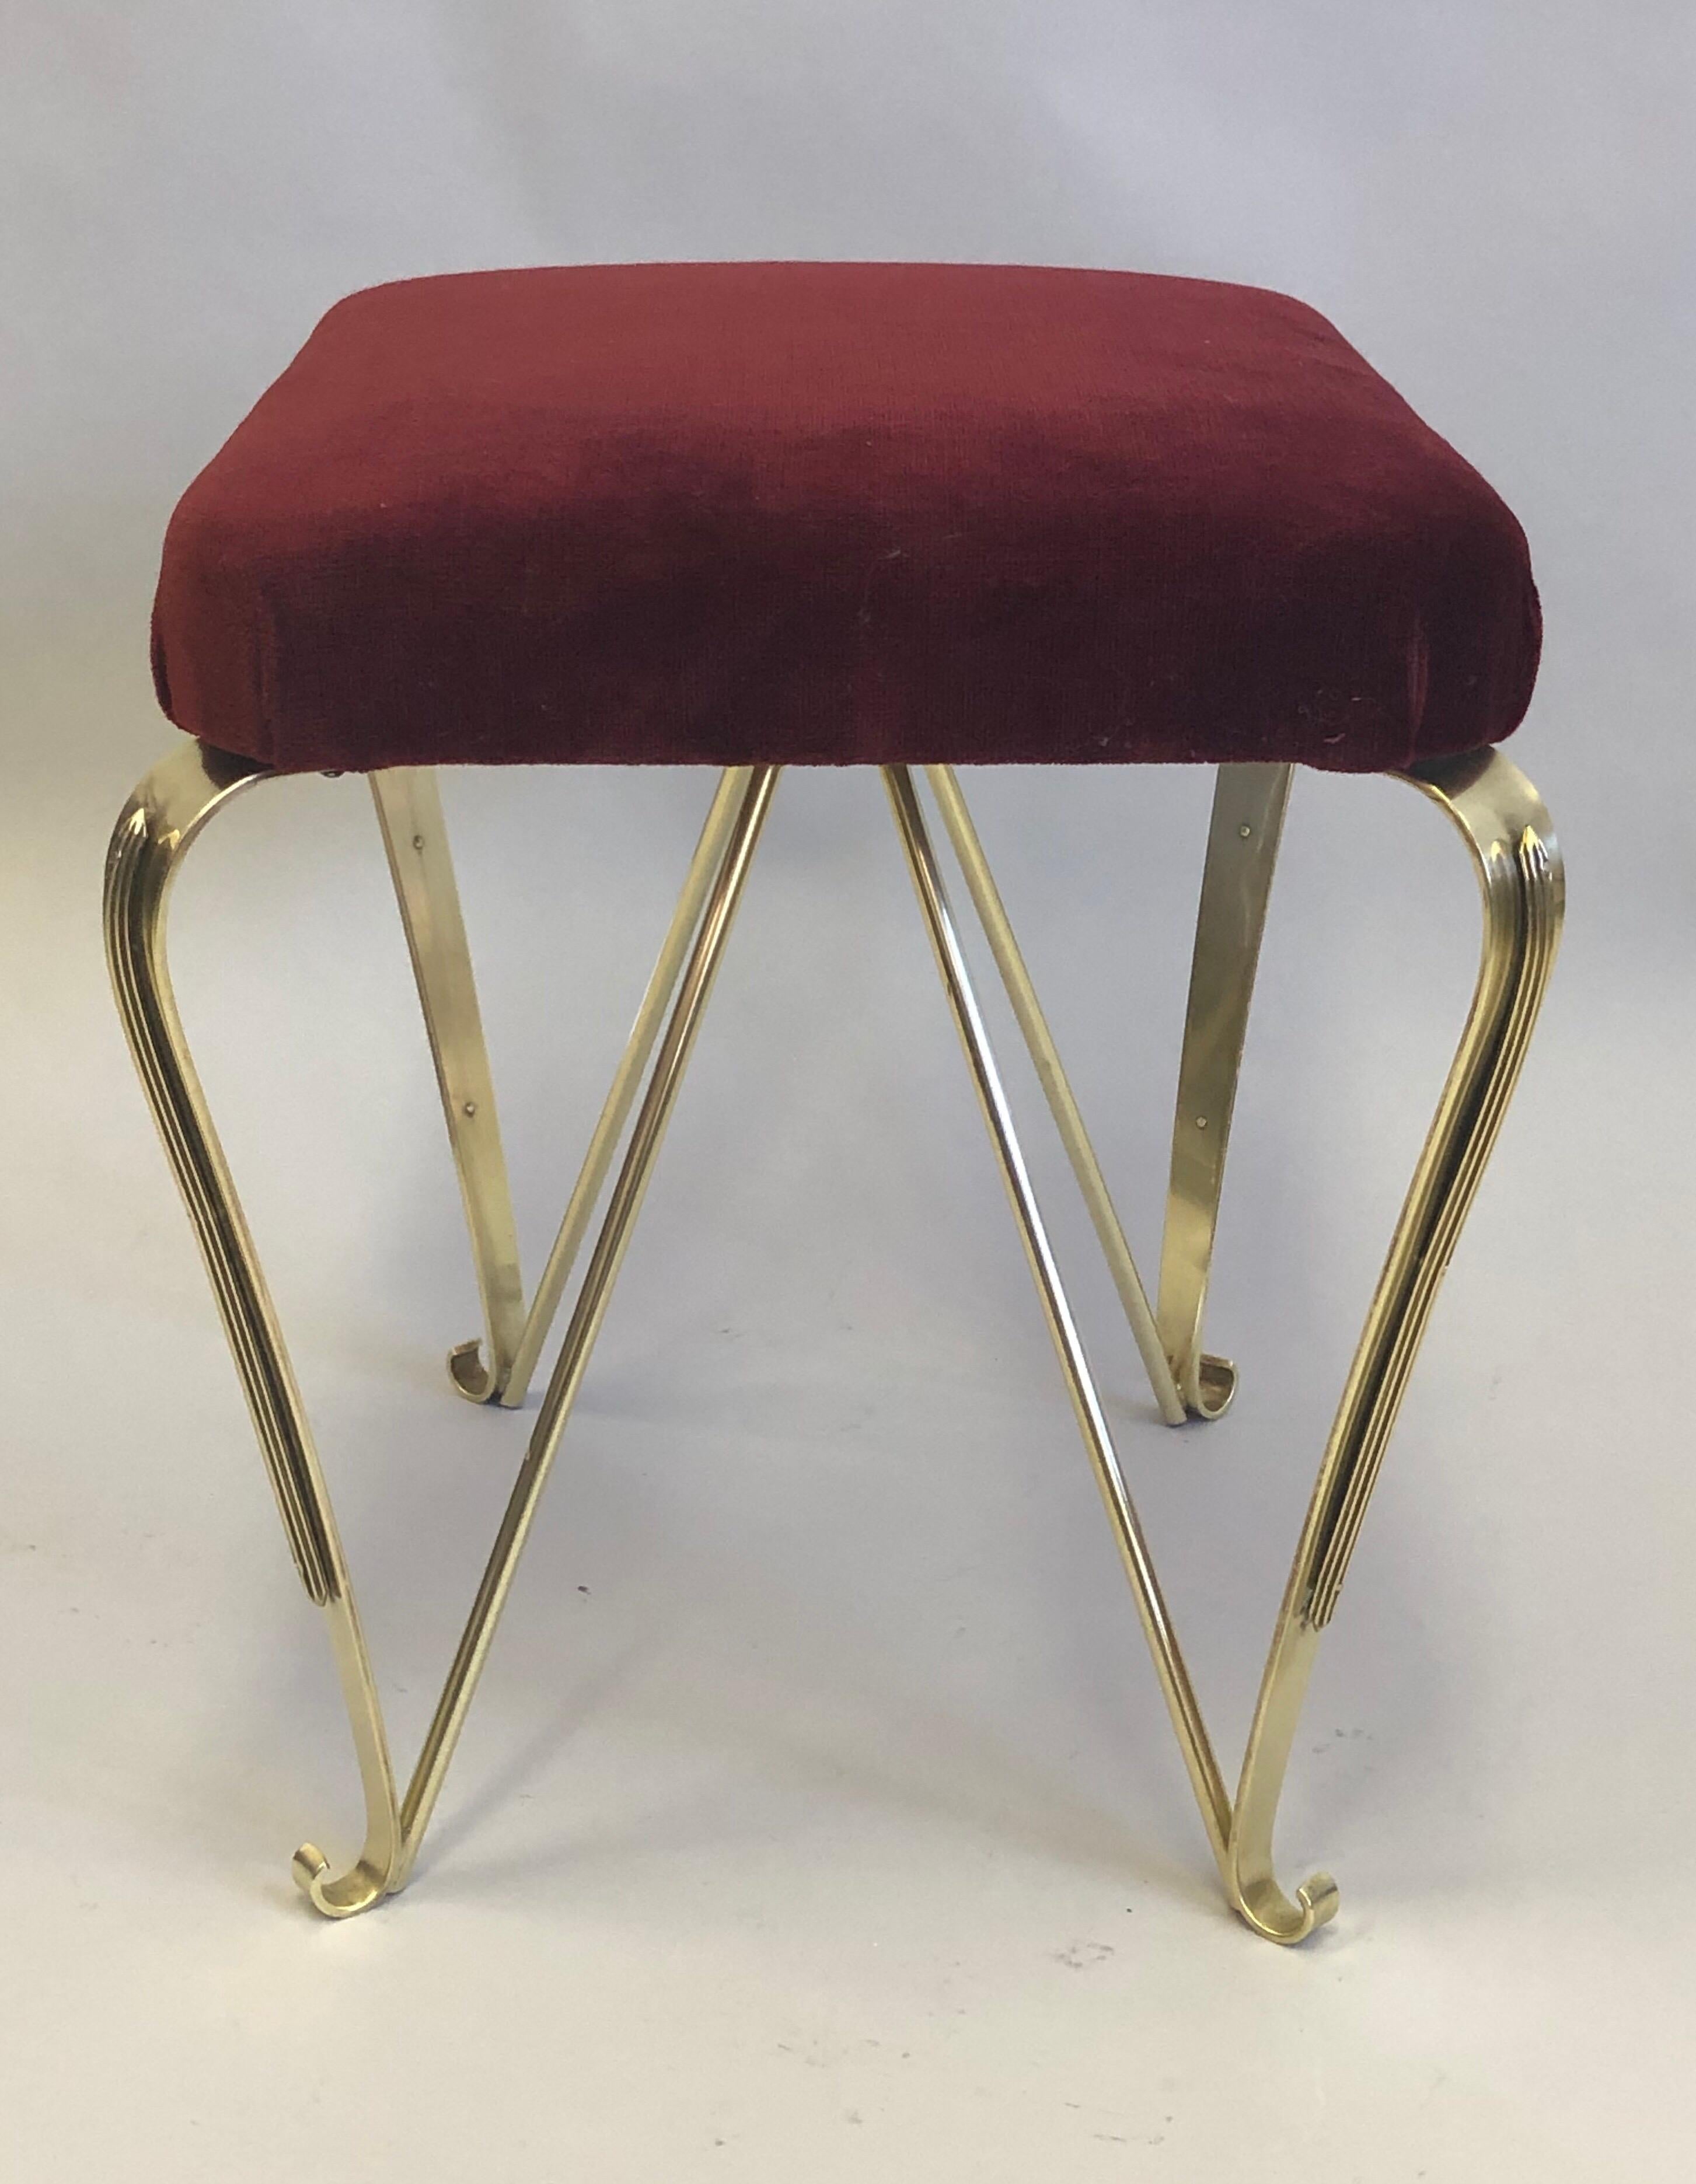 Pair of Italian Mid-Century Modern Neoclassical Solid Brass Benches by Jansen For Sale 5